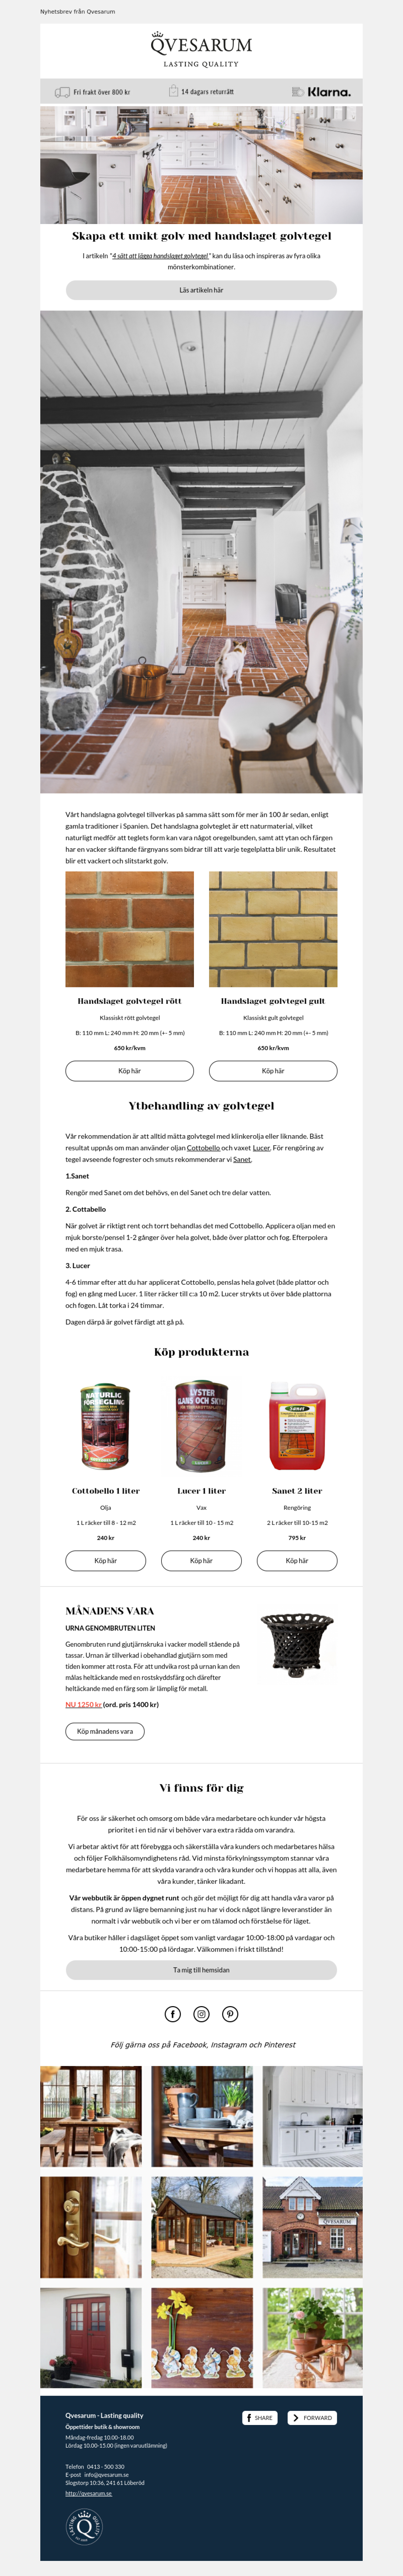 Qvesarum Lasting quality - e-commerce example - Made with MailerLite